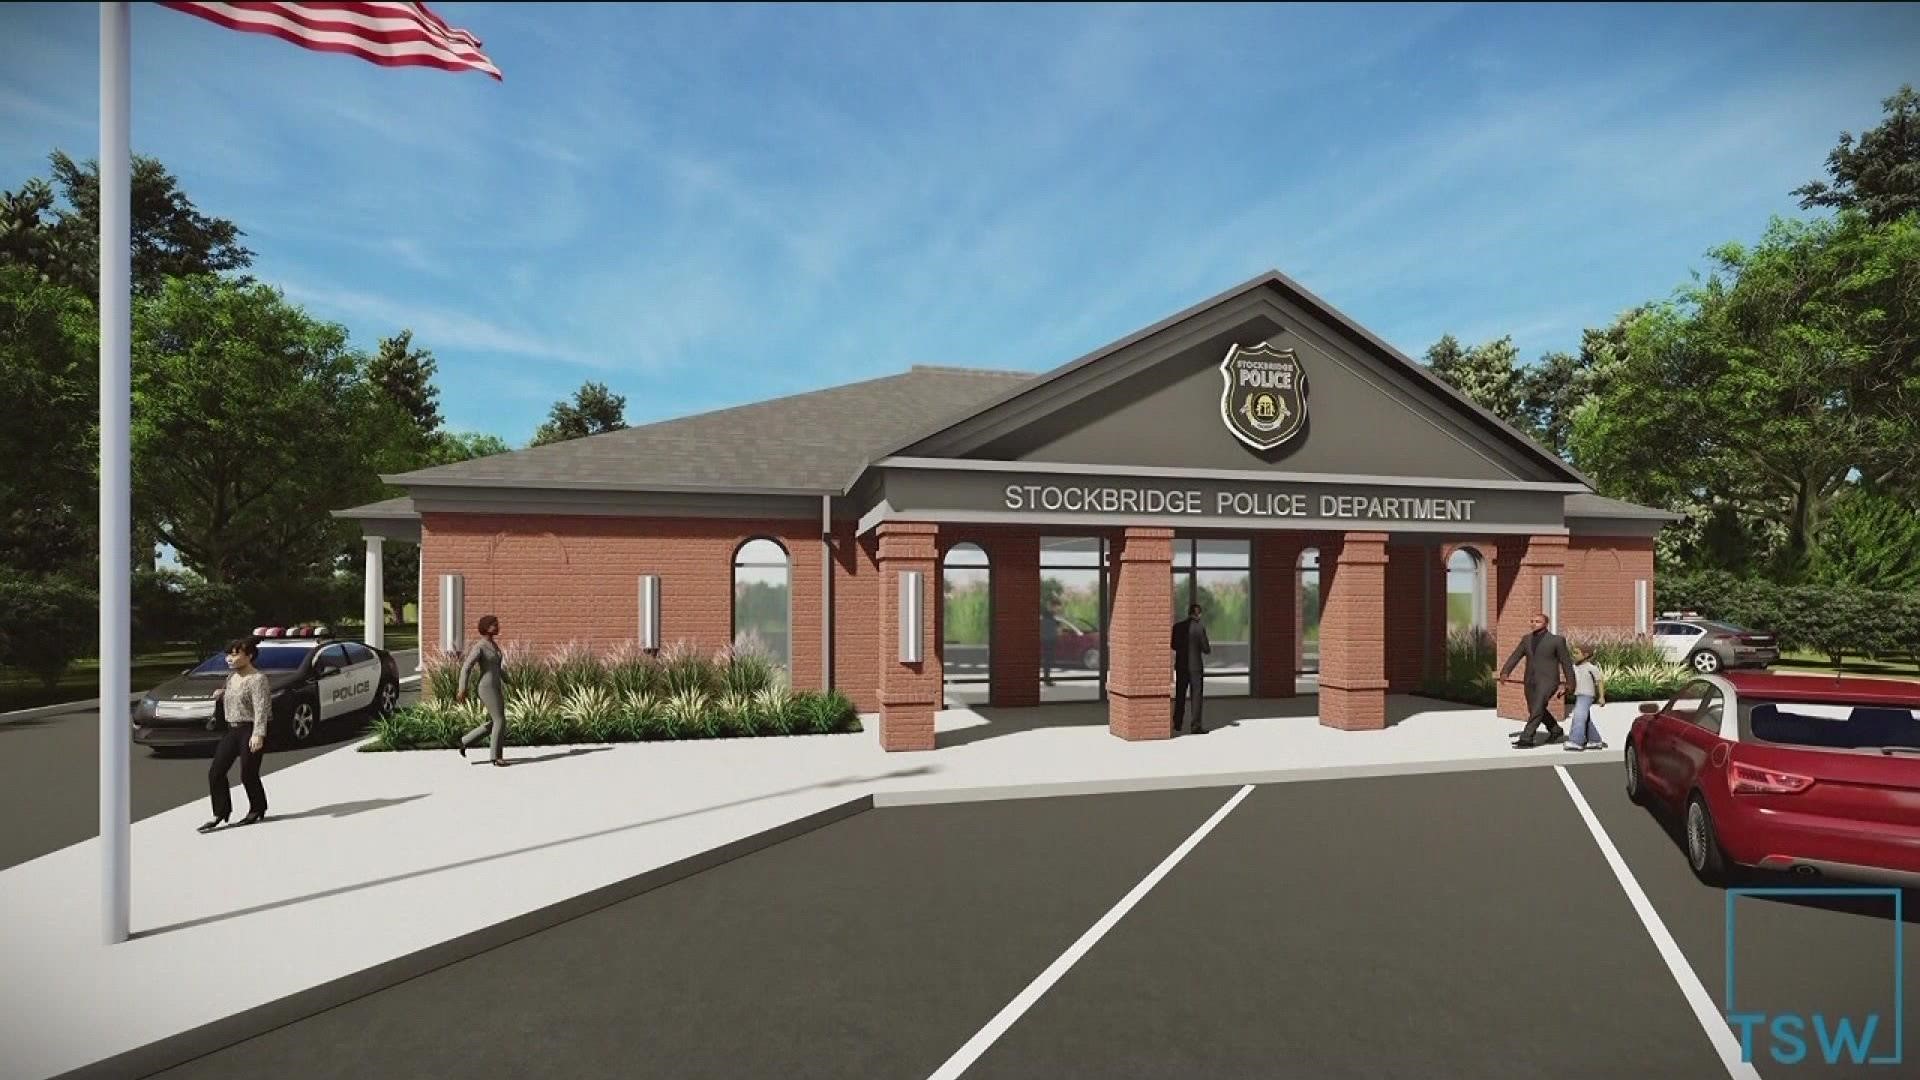 The new police department will take over on July 1.